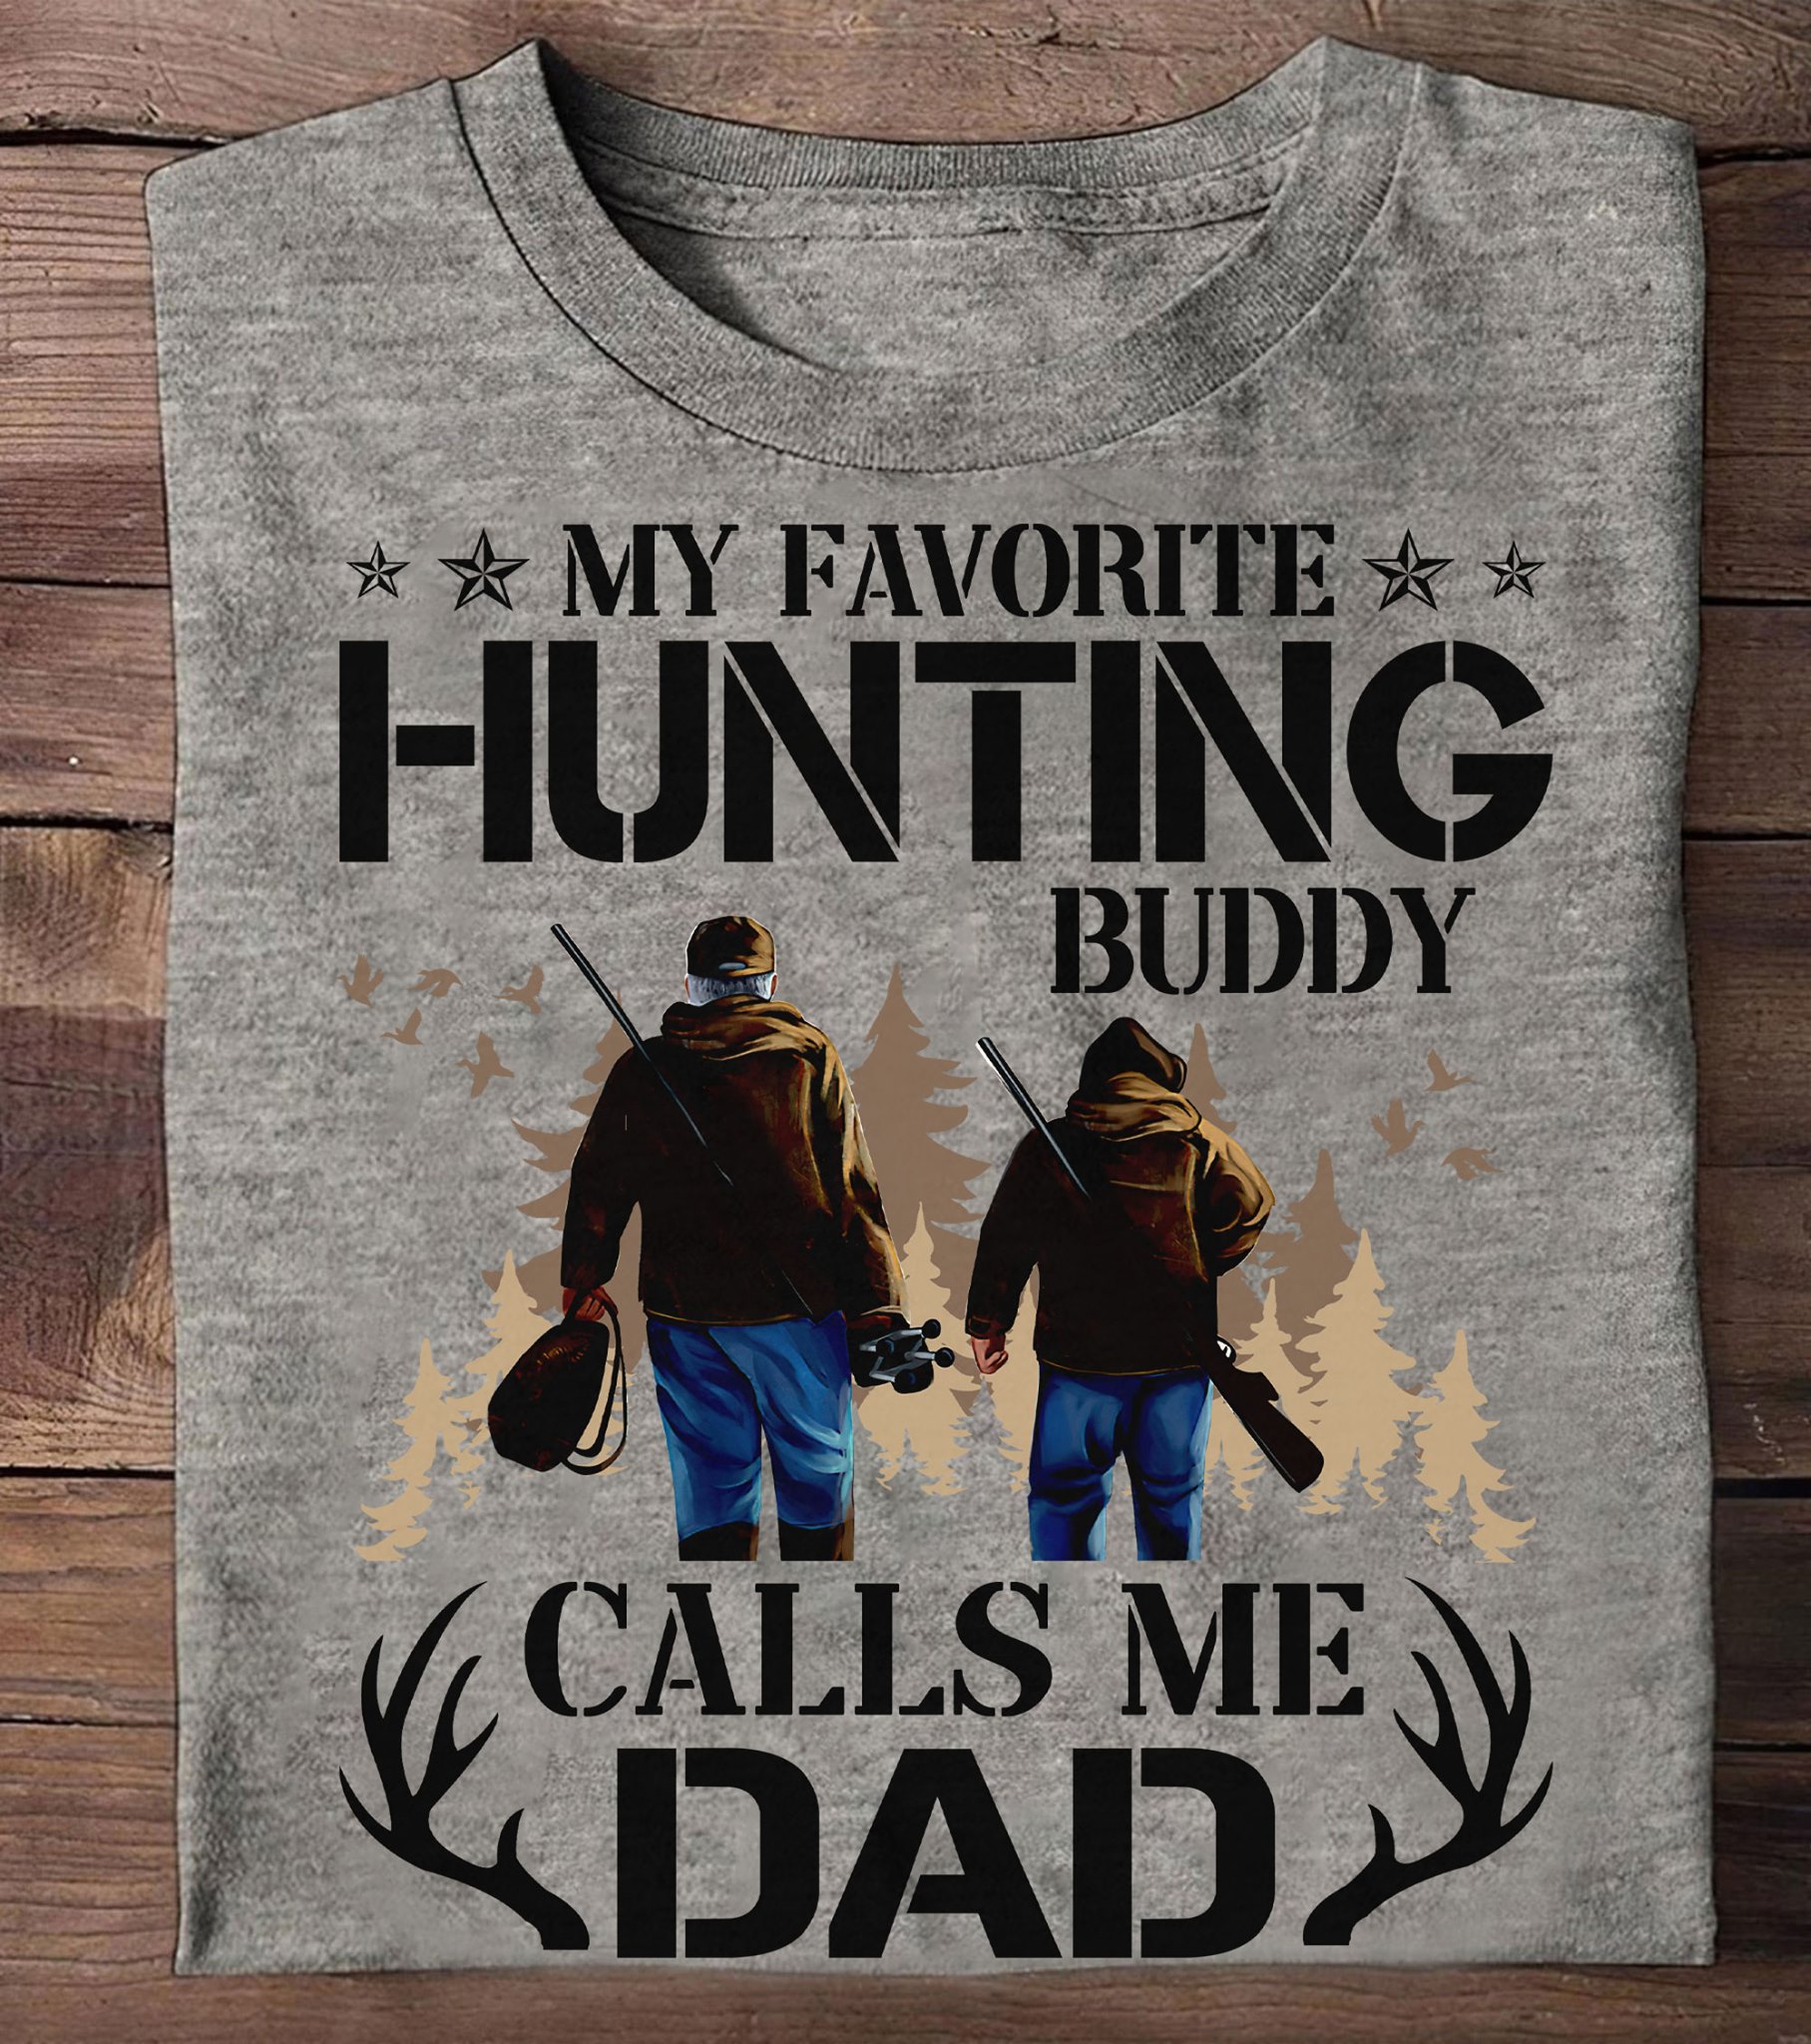 My favorite hunting buddy calls me dad - Love hunting, father's day gift